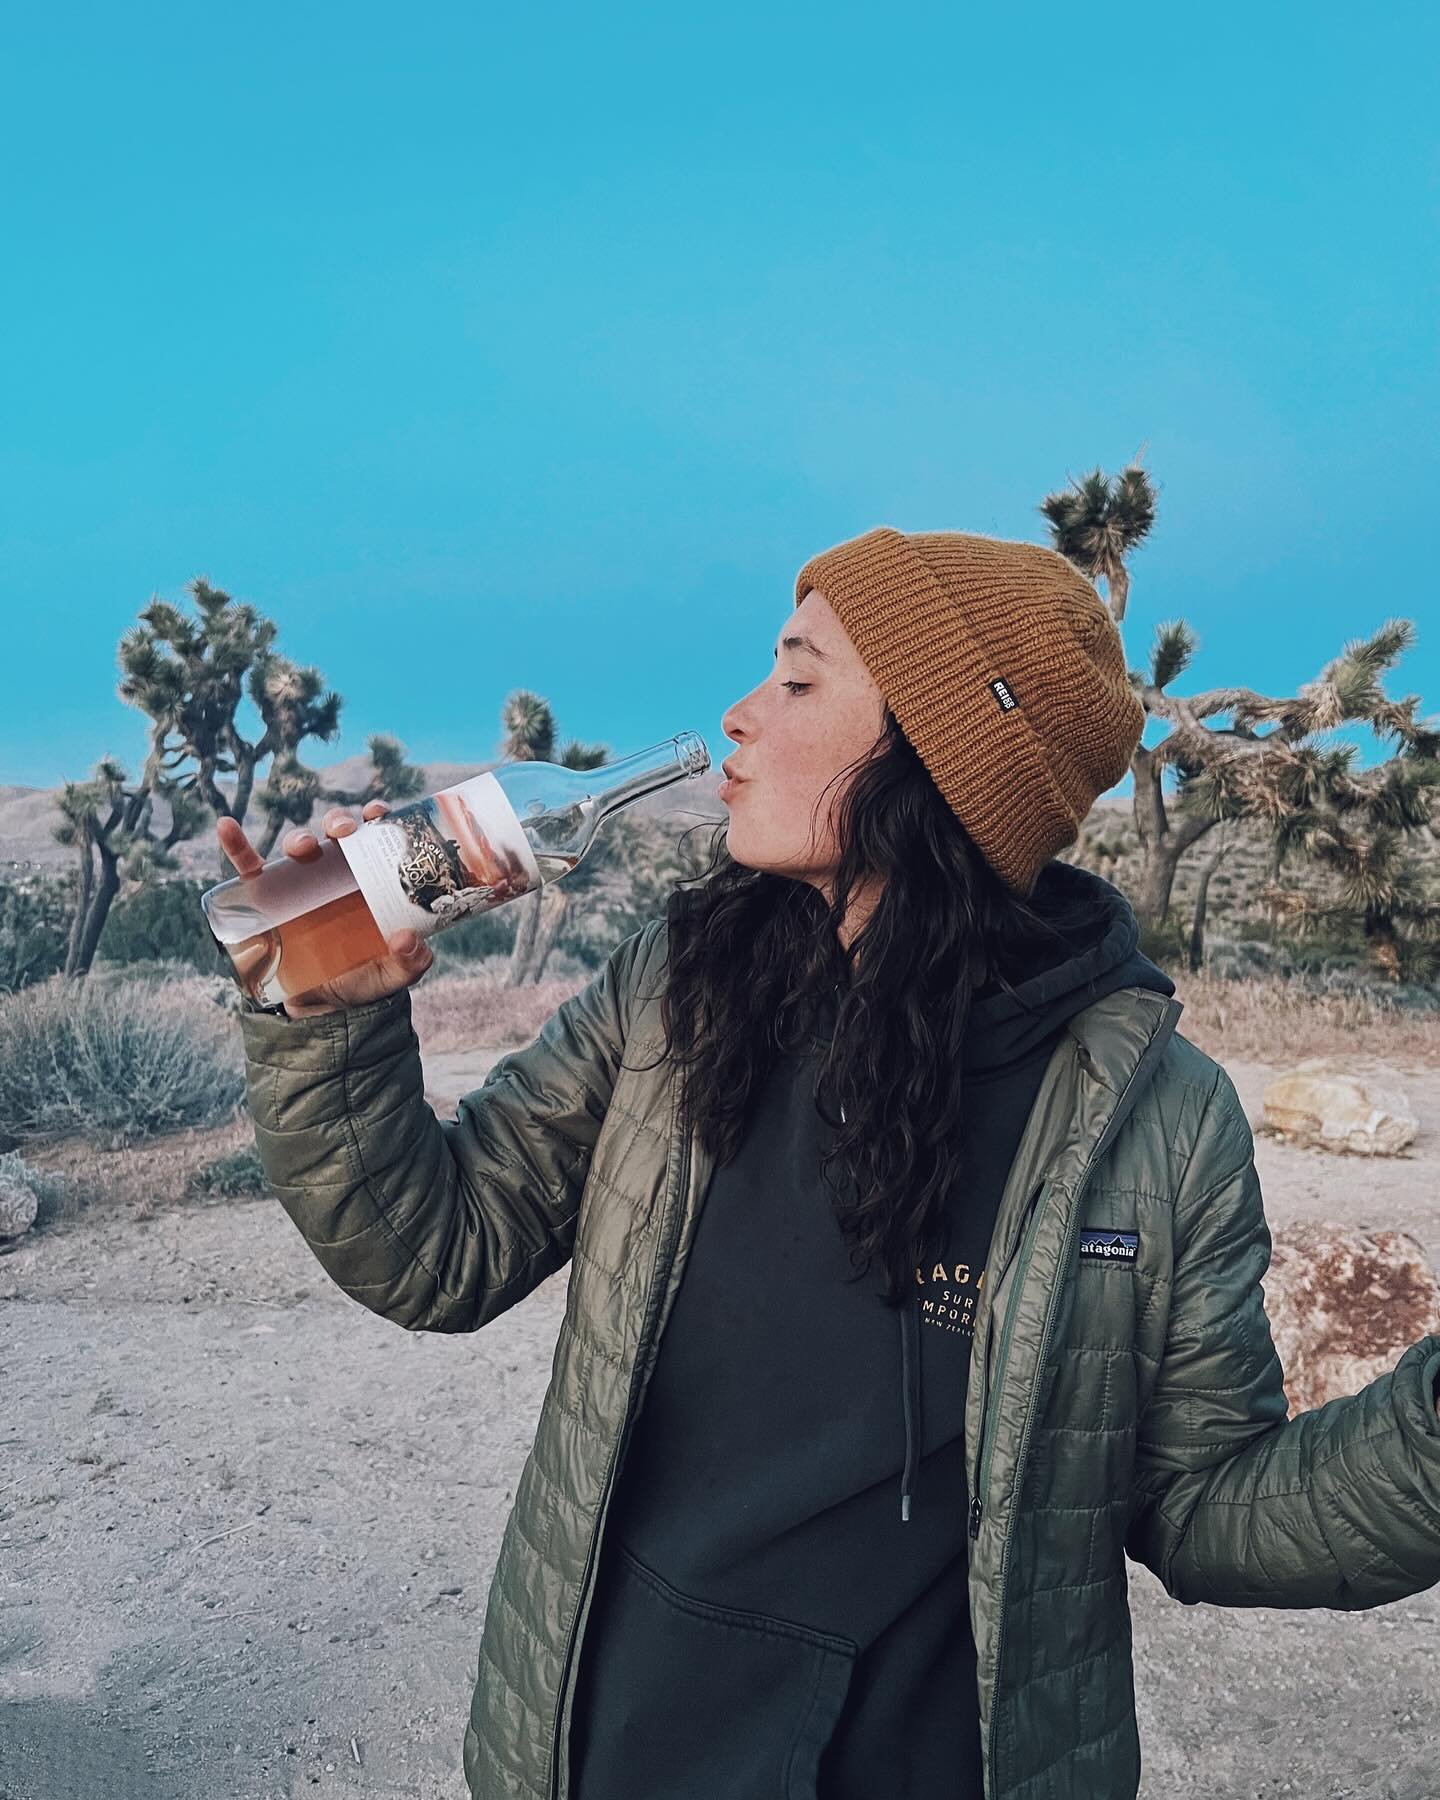 Out On Adventure🌵 
⠀⠀⠀⠀⠀⠀⠀⠀⠀
We love to see these wines in the wild&hellip;

Where will you be sipping this summer? 
⠀⠀⠀⠀⠀⠀⠀⠀⠀
#YourFavoriteHikingBuddy #StayHydrated

(Also, happy happy birthday @huertalauren)
.
.
.
#BelongWineCo #BelongWines #ElDor